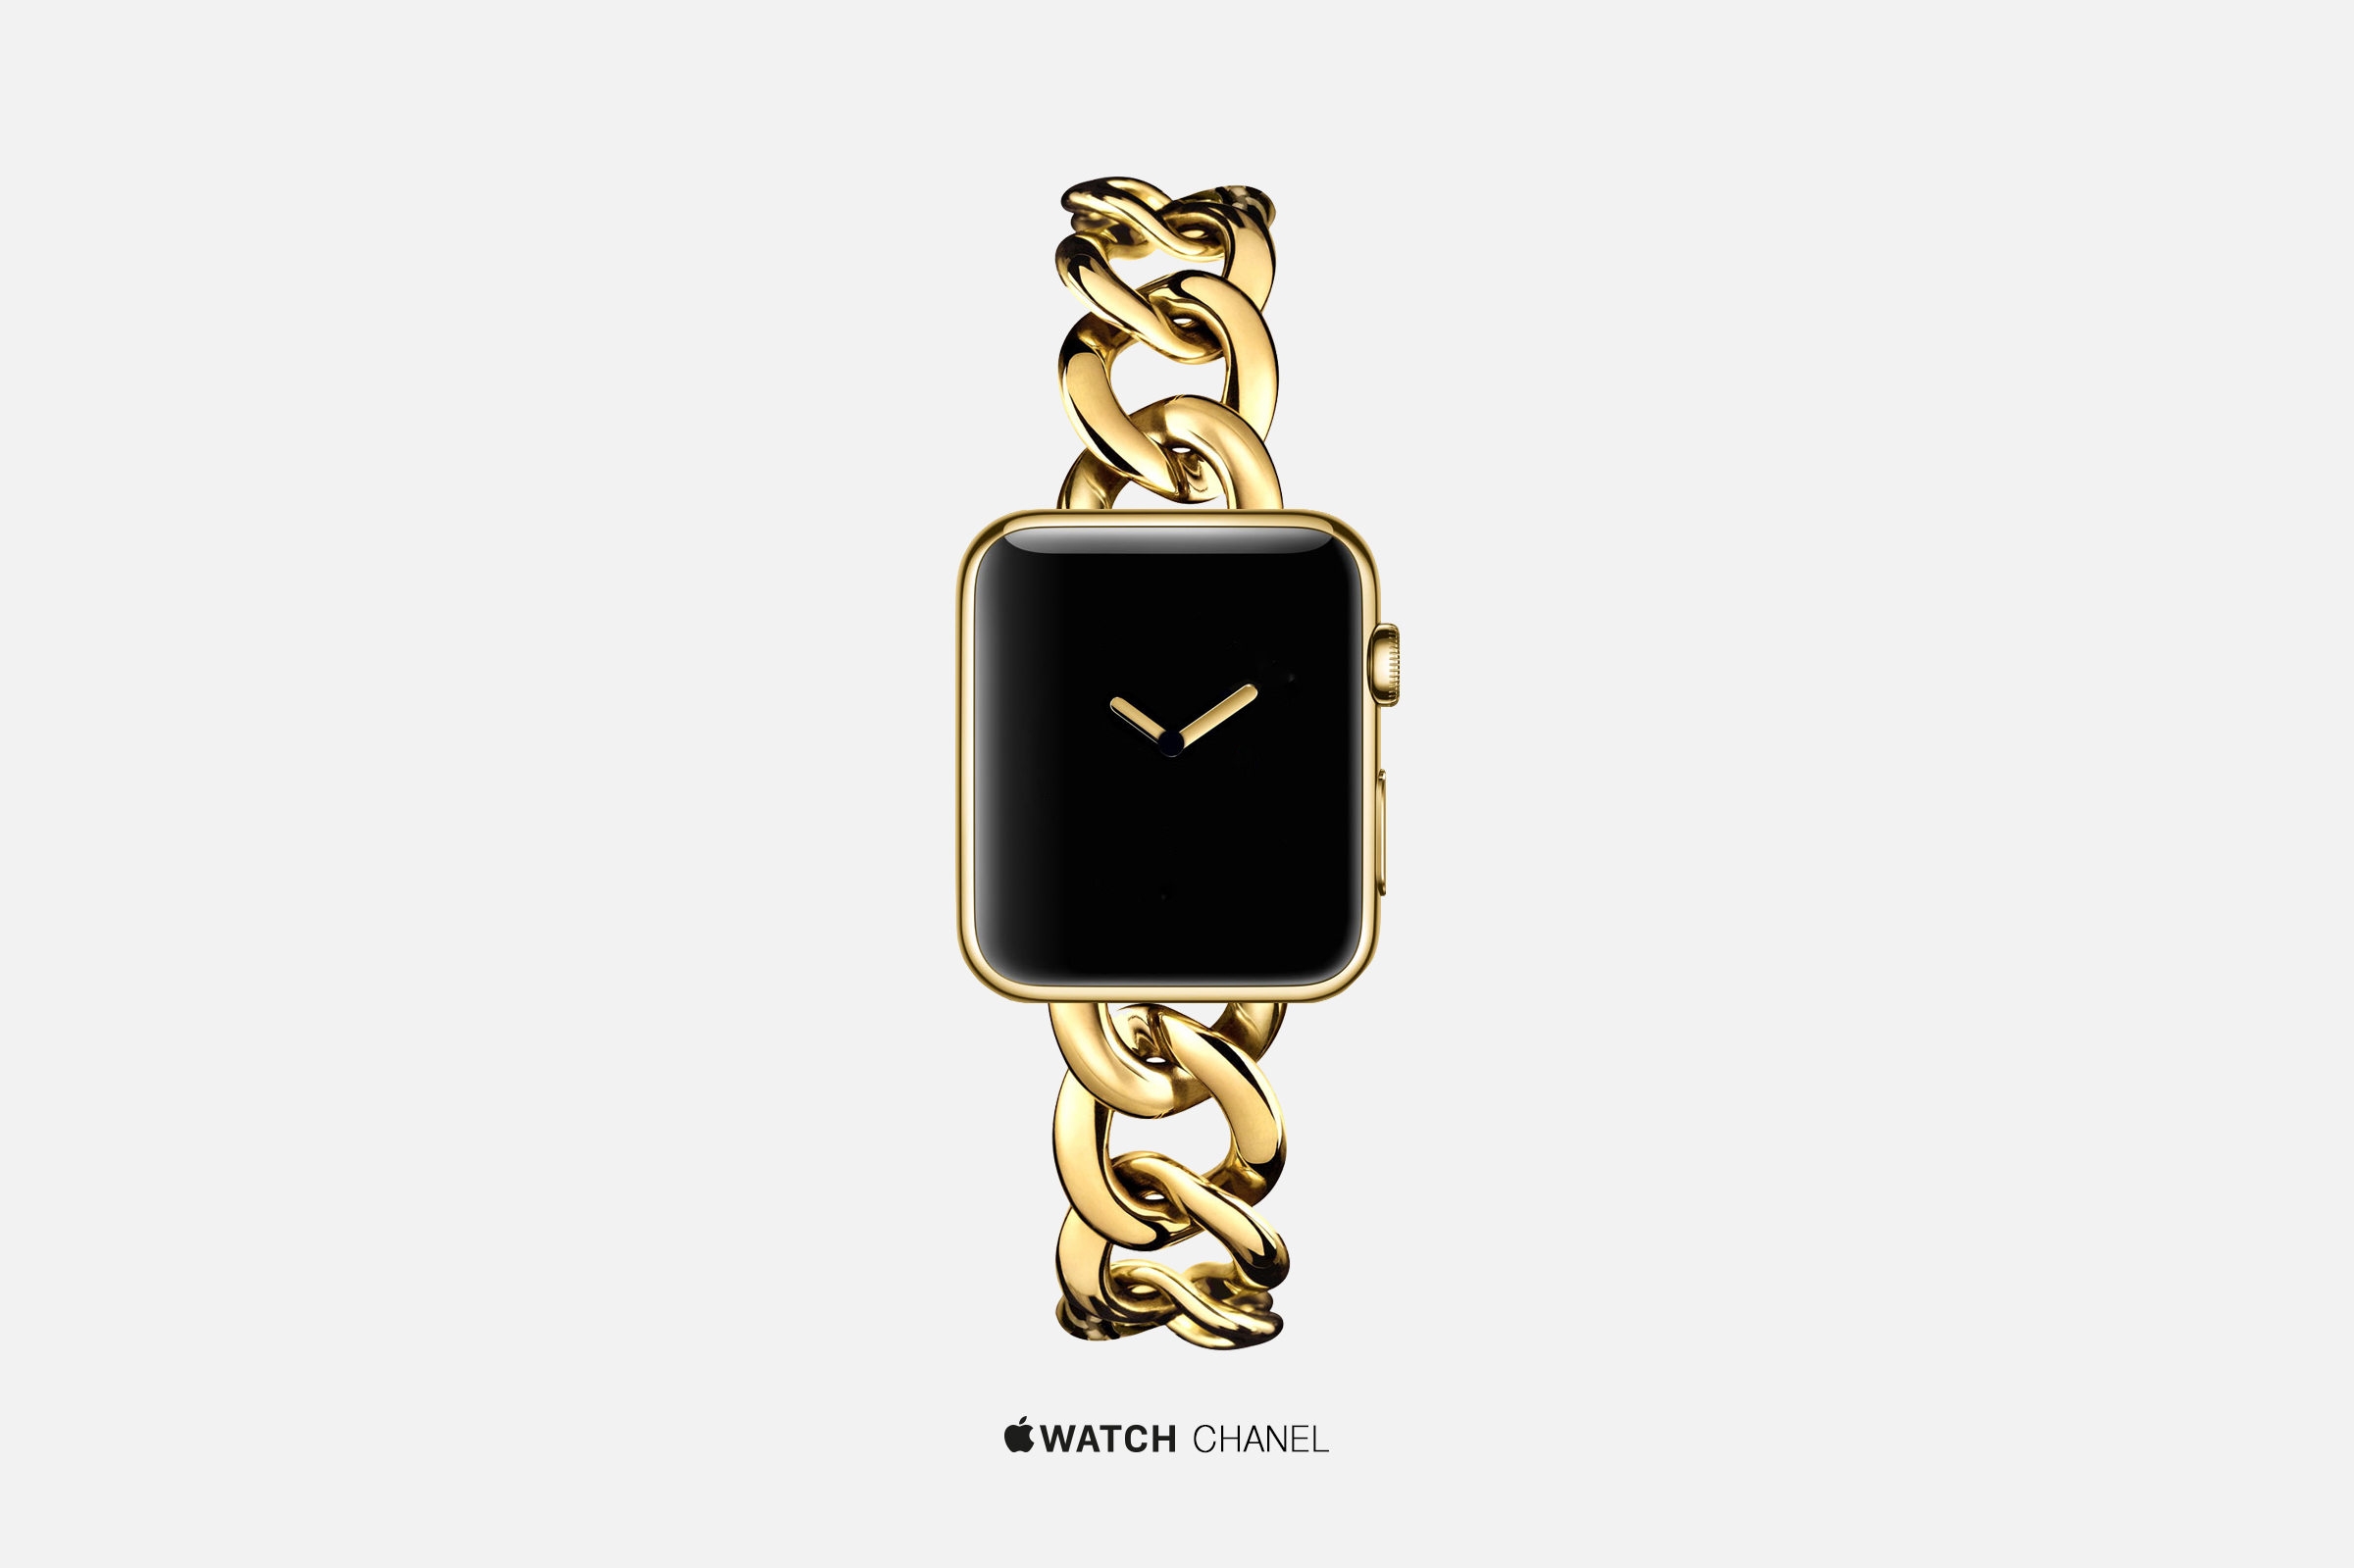 An artist's concept of an Apple Watch by Chanel.